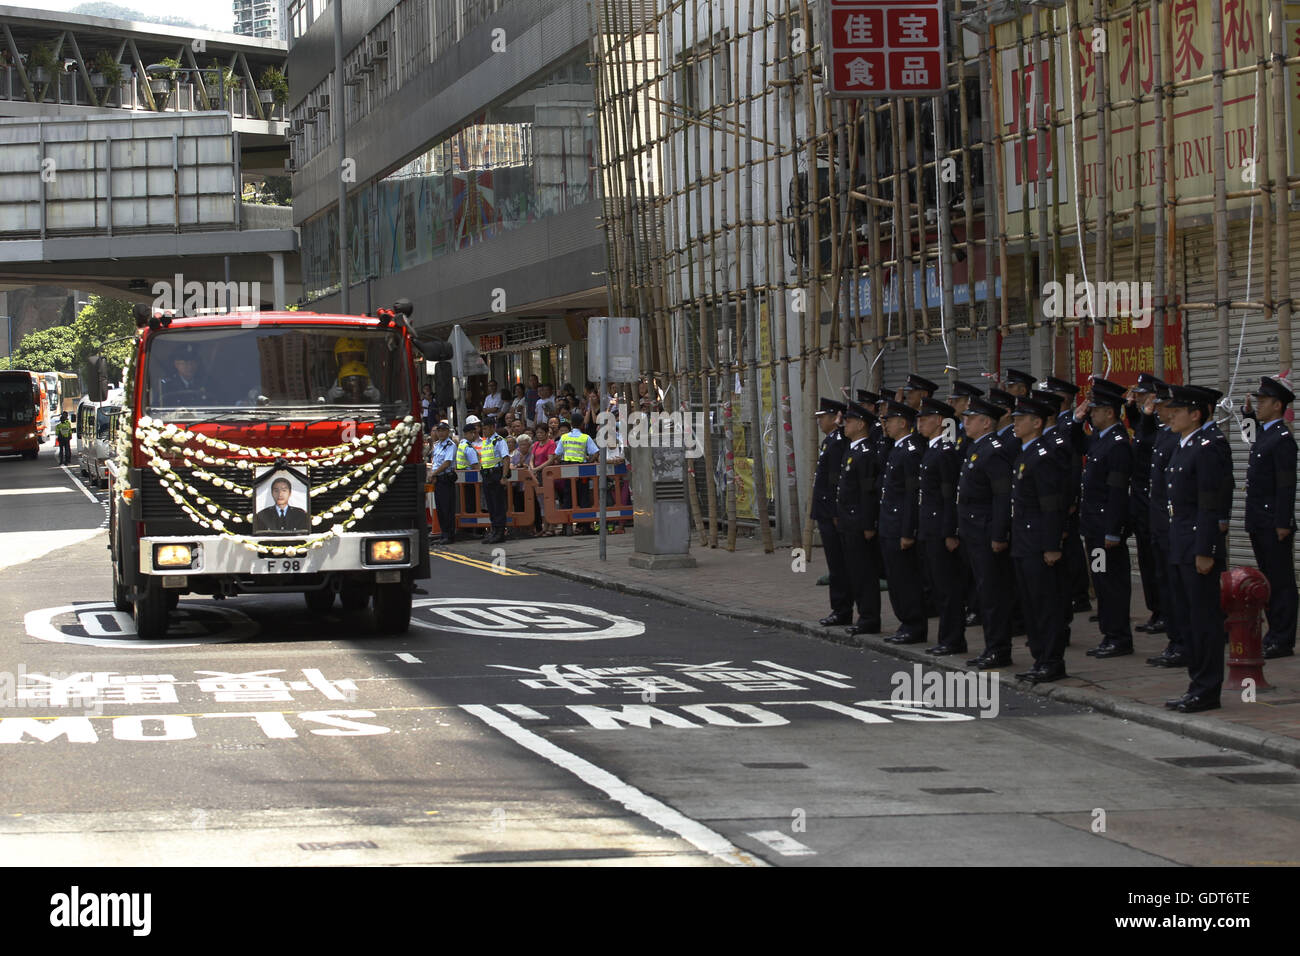 Honng Konng. 22nd July, 2016. Officers from Fire Services Department salute as a fire engine which carries body of late senior fireman, Samuel Hui arrived at scene of the fire which took senior firemans life on the June 21, 2016. A class 4 fire that broke out on the June 21, 2016 burning the industrial building for 4 days was a worst fire ever to hit the territory in recent years claiming lives of two firefighters. July 22, 2016. Hong Kong. 22nd July, 2016. Liau Chung Ren/ZUMA Credit:  Liau Chung Ren/ZUMA Wire/Alamy Live News Stock Photo